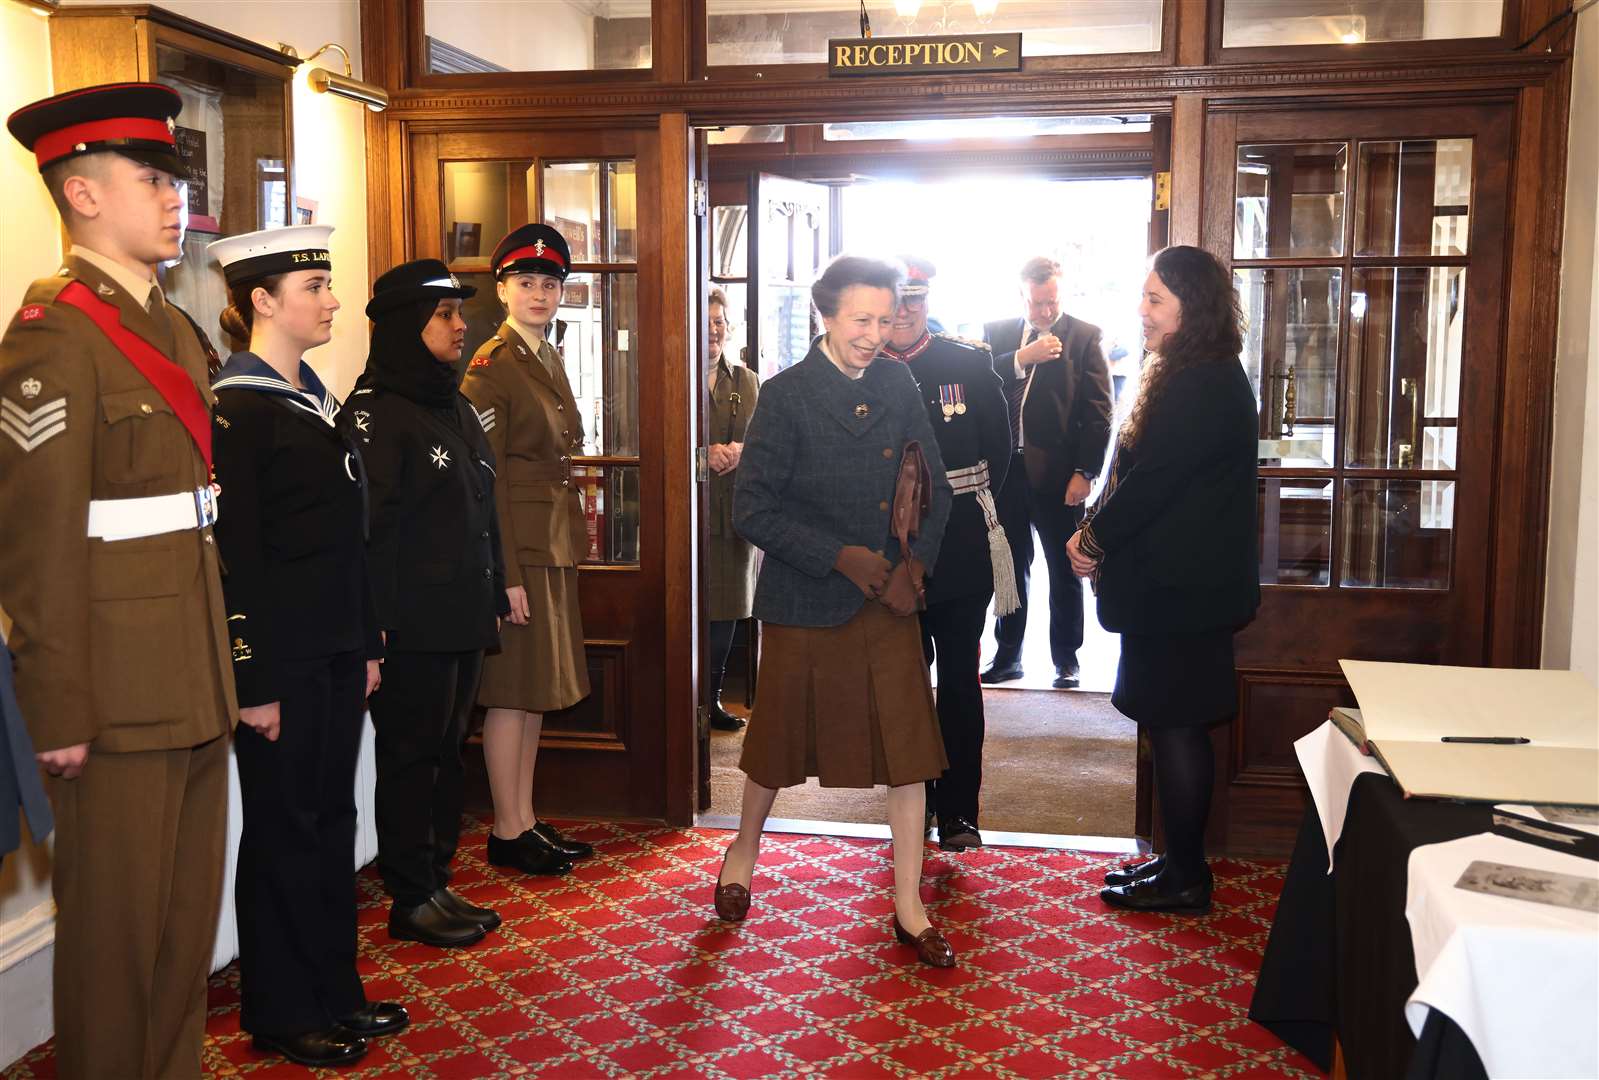 The Princess Royal arrives for her visit to the Off the Streets community group in Wellingborough, Northamptonshire (Darren Staples/PA)